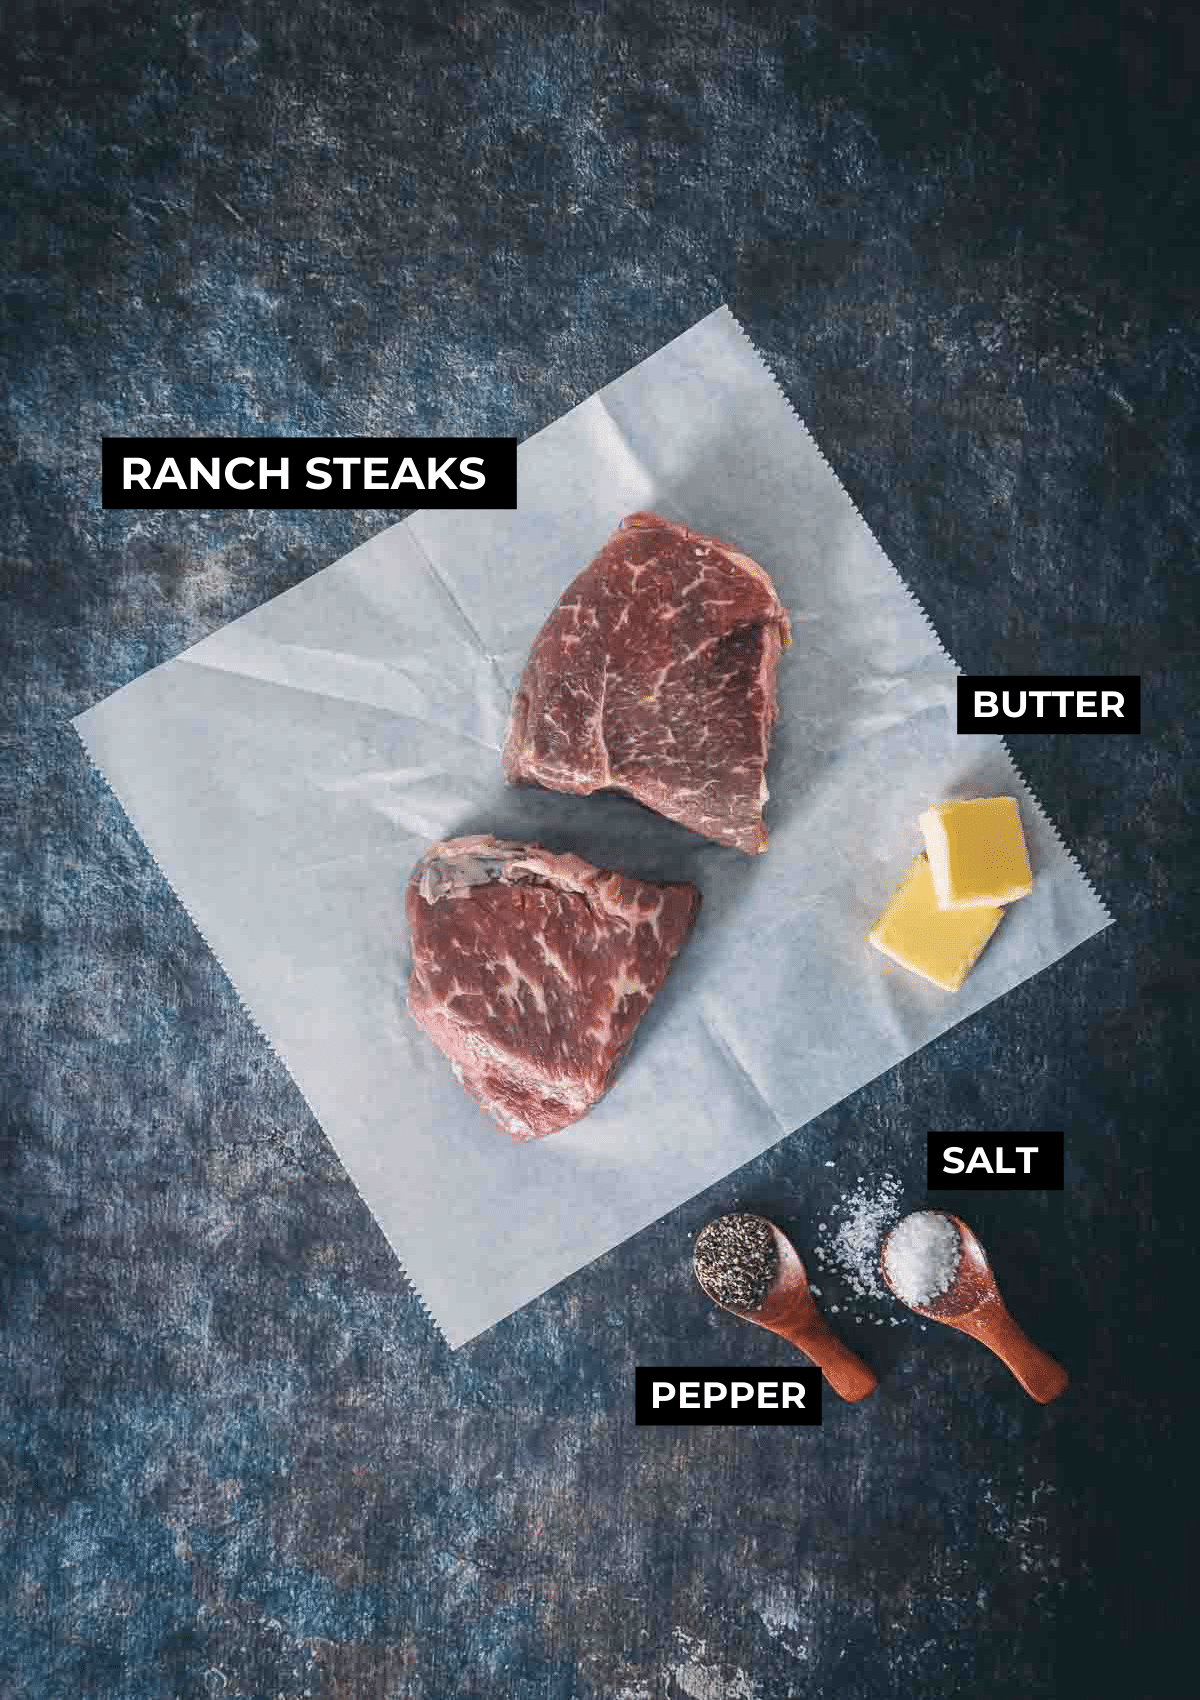 Ingredients for this pan seared steak recipe. 